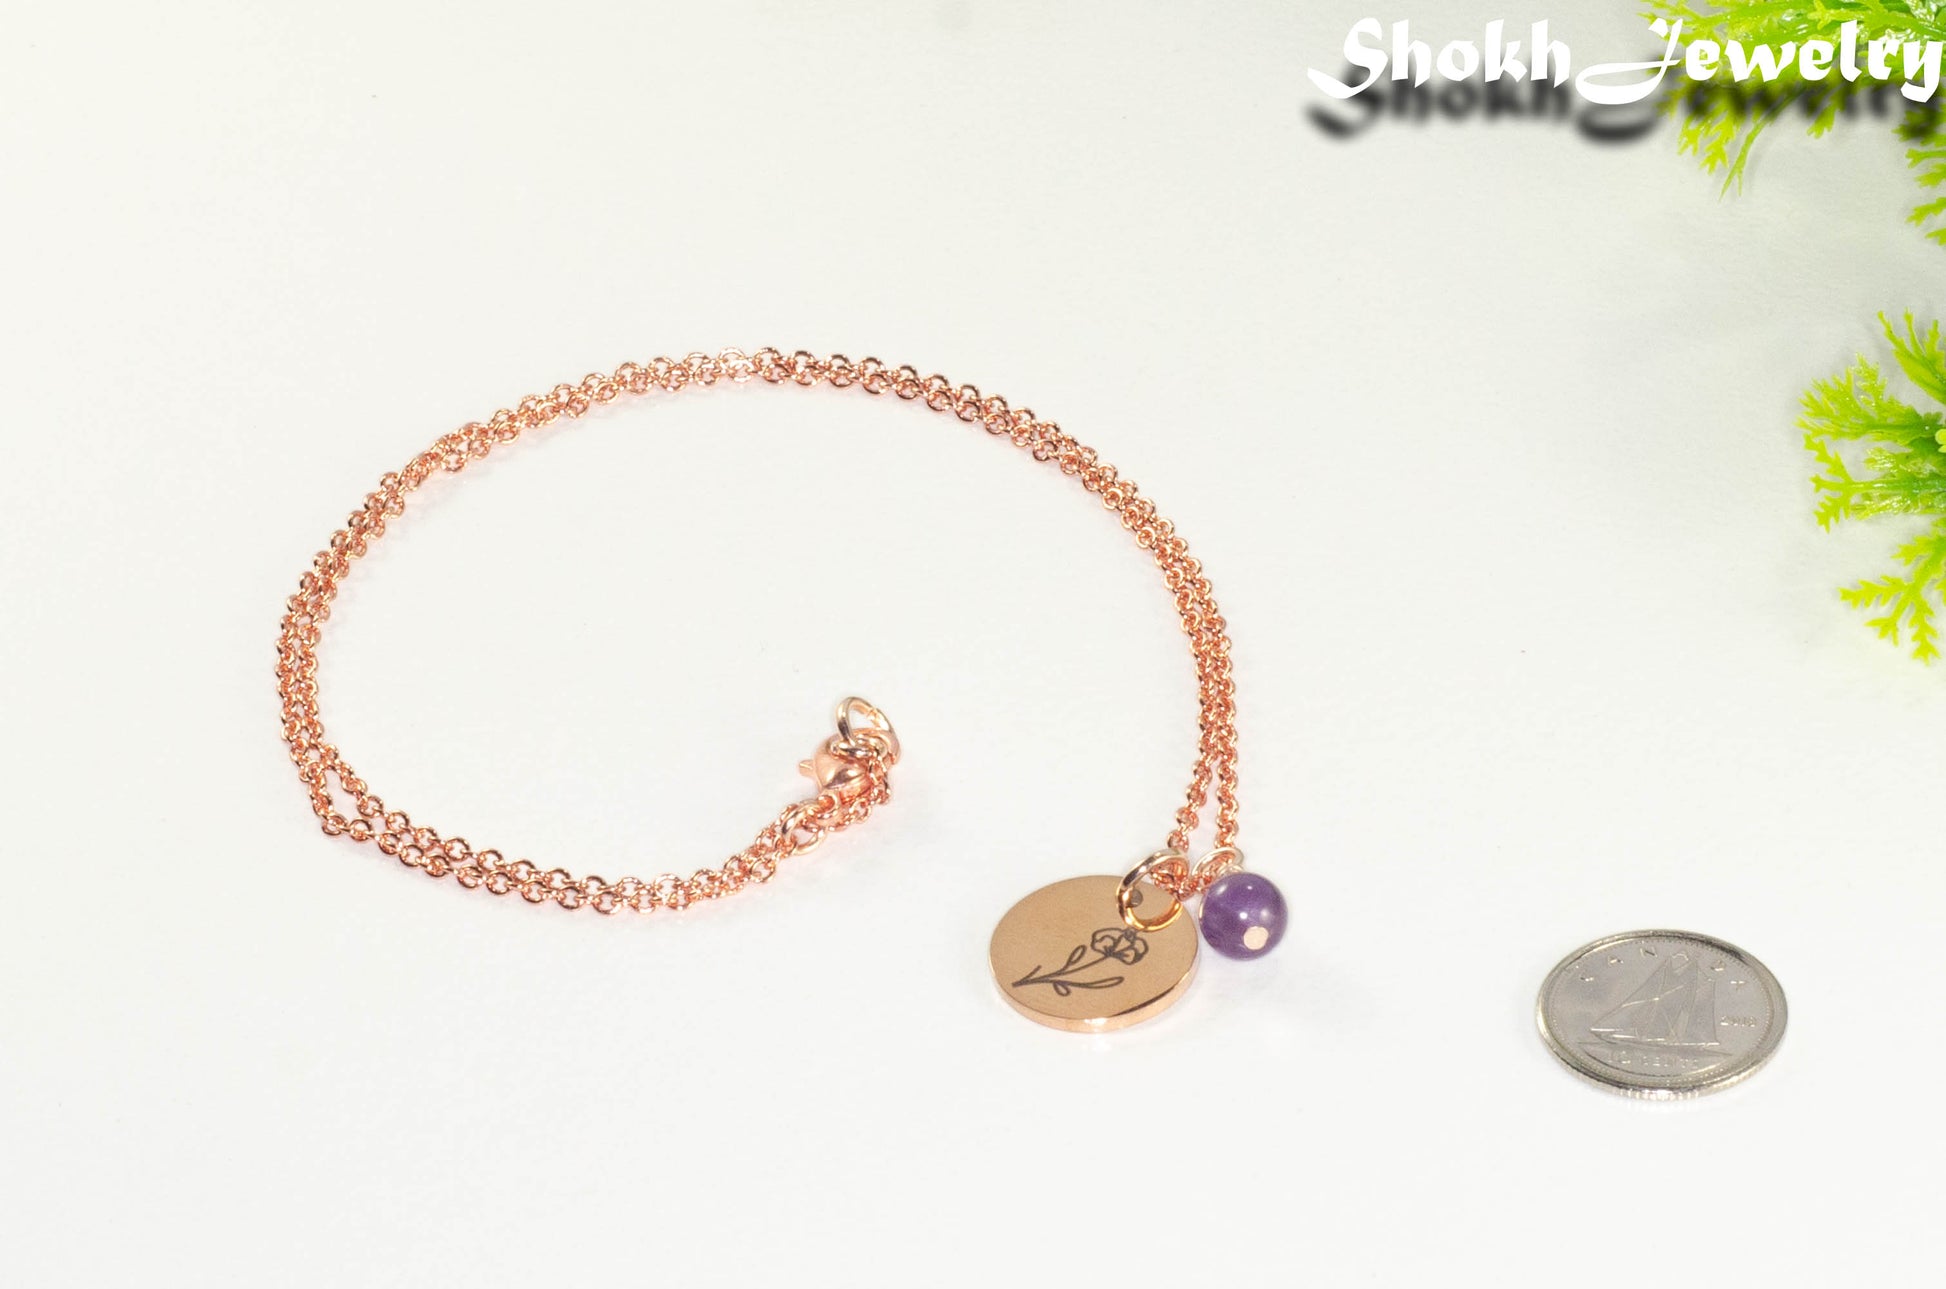 Rose Gold Plated February Birth Flower Necklace with Amethyst Birthstone Pendant beside a dime.